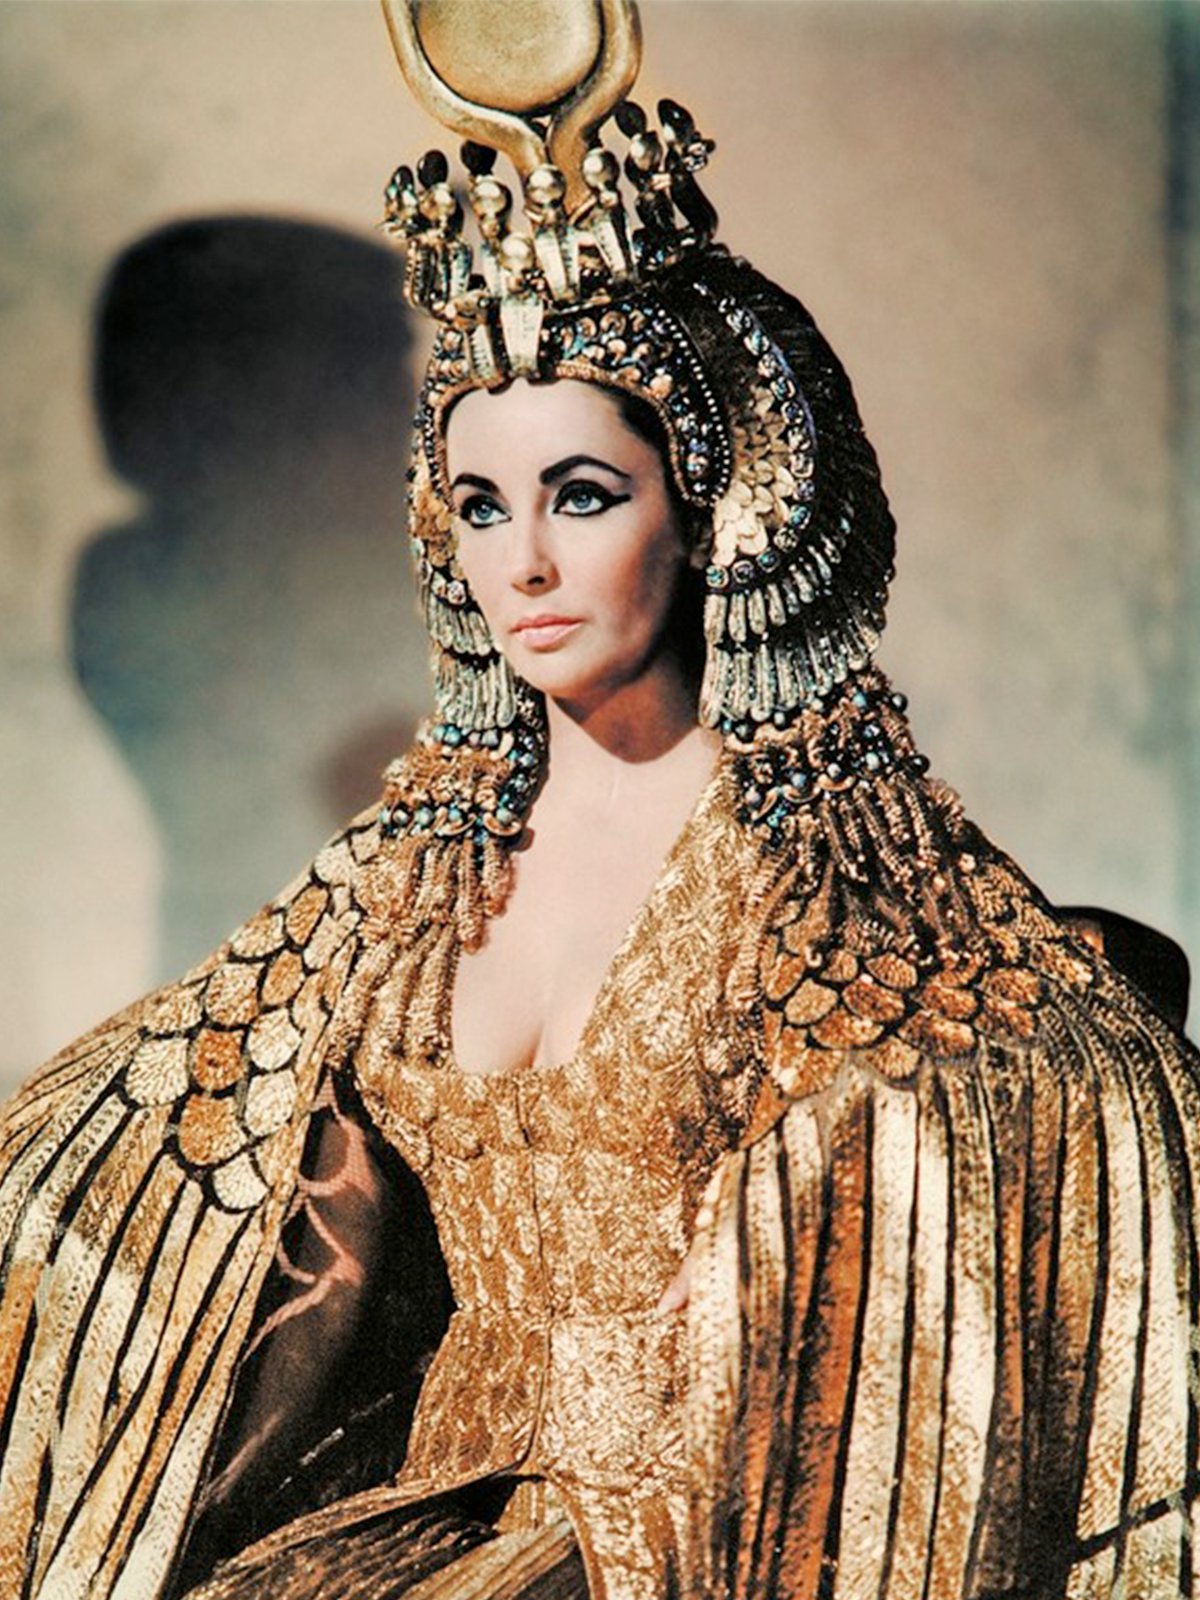 A regal and sumptuous gold gown for diva Liz Taylor 